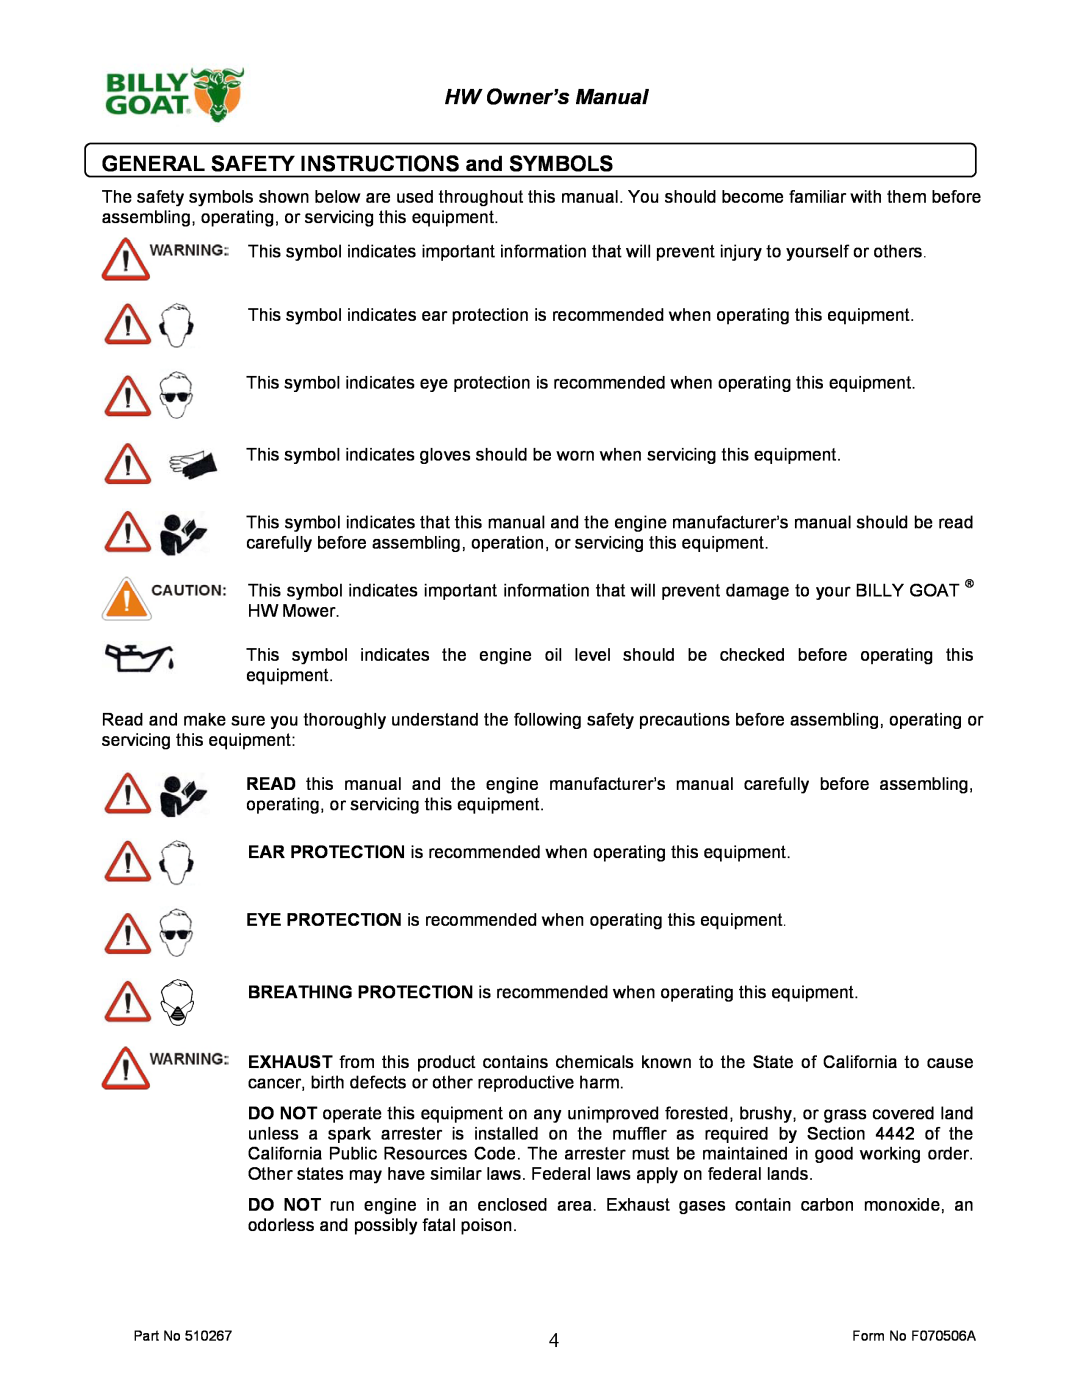 Billy Goat 510223 owner manual GENERAL SAFETY INSTRUCTIONS and SYMBOLS 